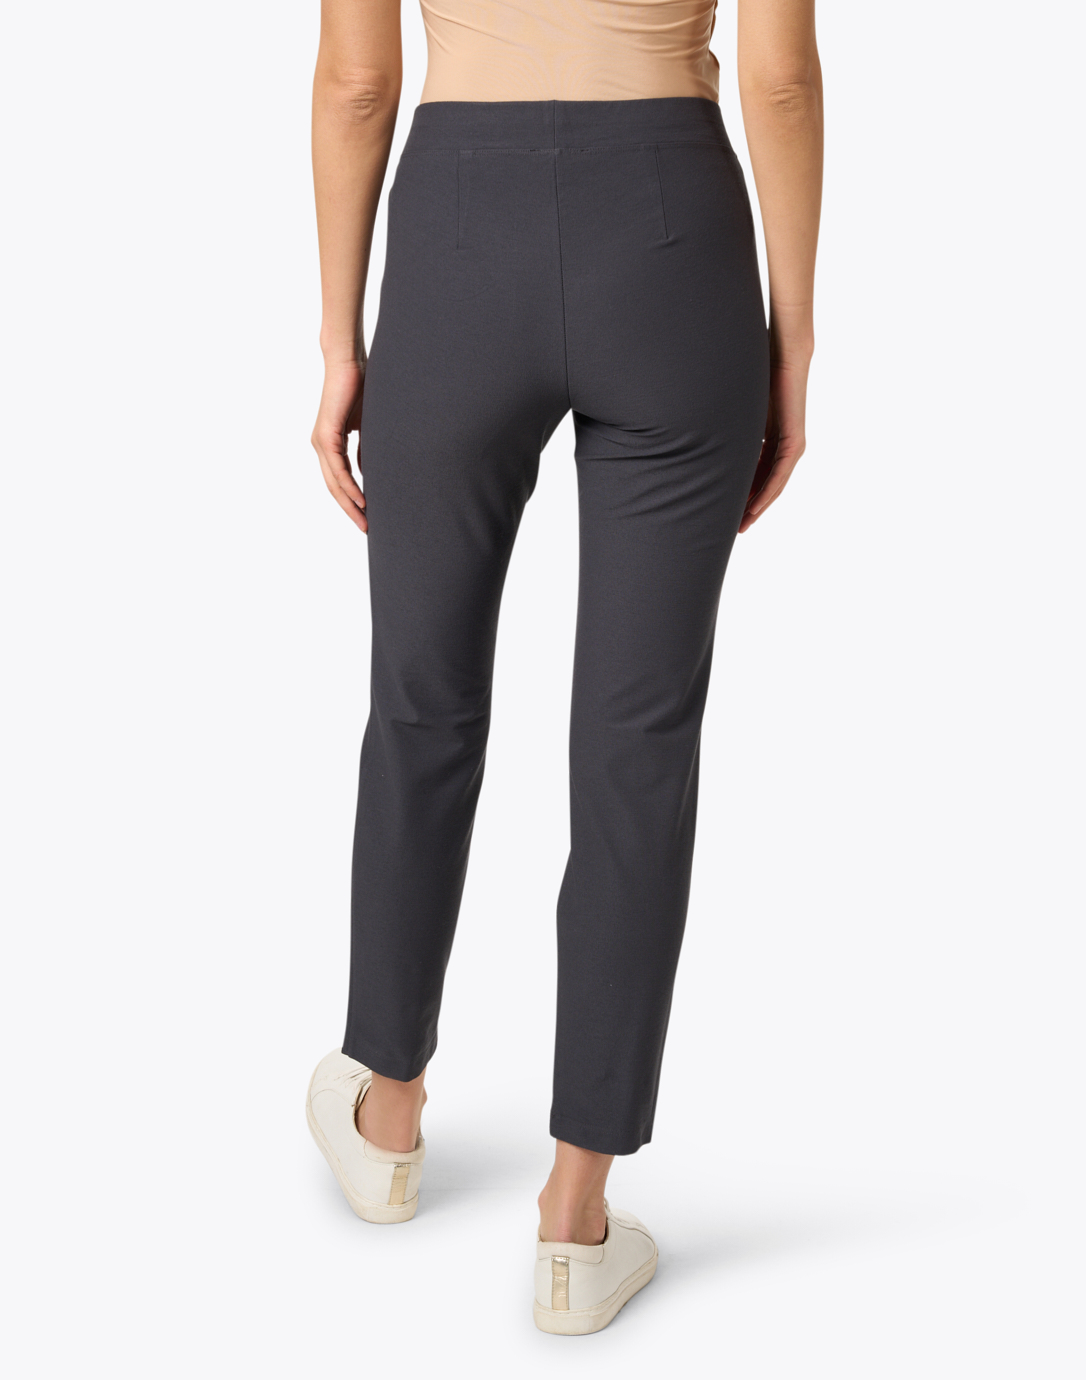 EILEEN FISHER WOMAN Washable Stretch Crepe Slim Ankle Pants